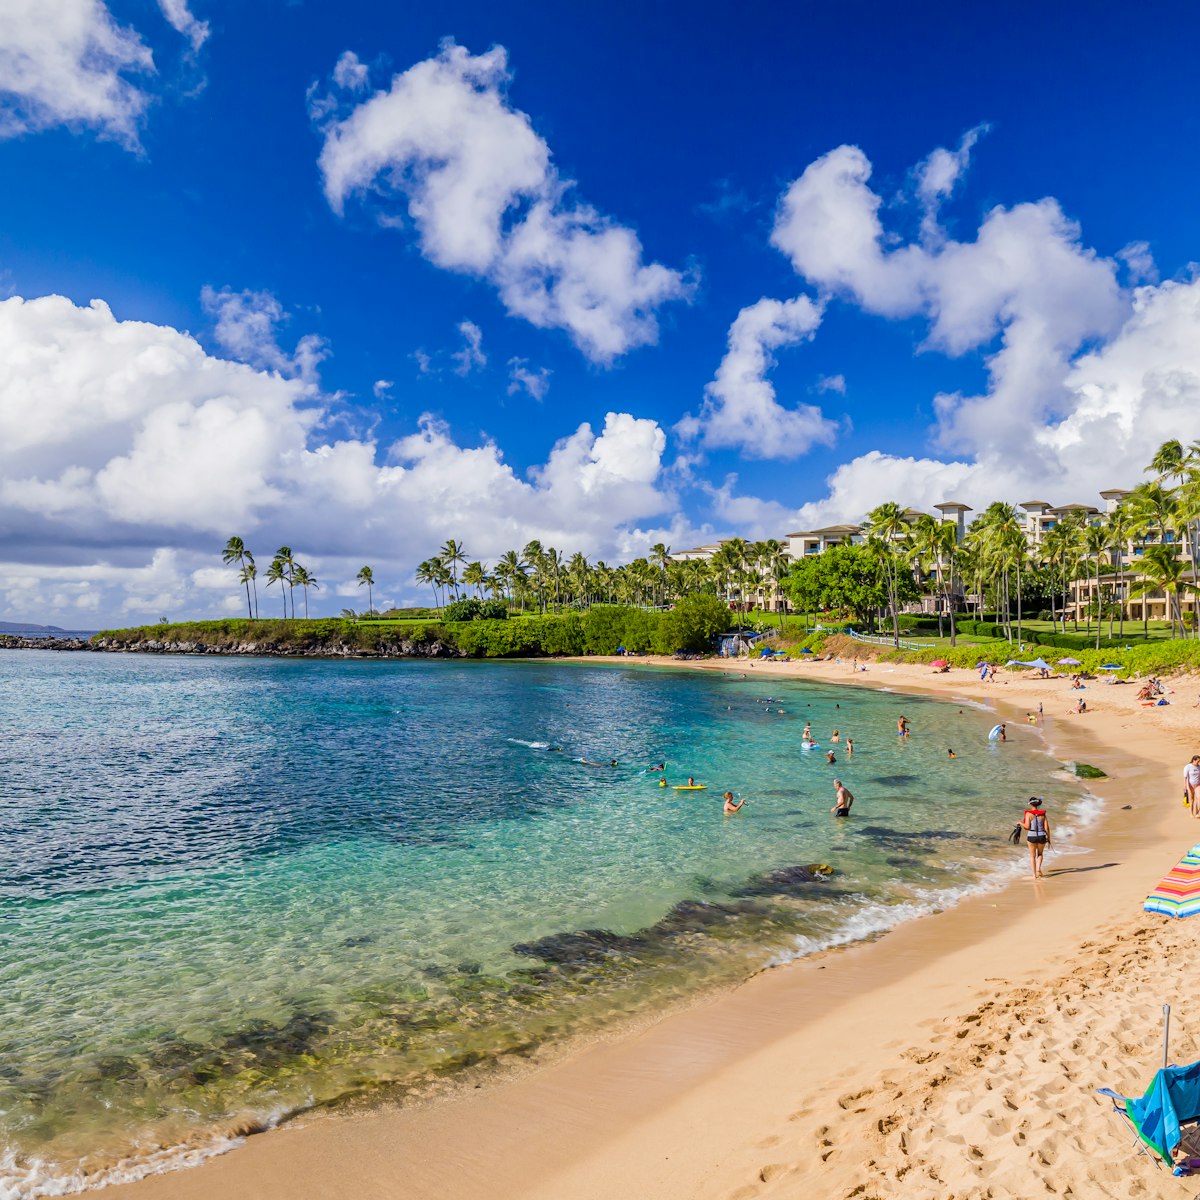 Kapalua beach bay, Maui, Hawaiian Islands - Aug 2019: Quiet, elegant, picturesque, Kapalua boasts beautiful seabed and ideal atmosphere for family vacation